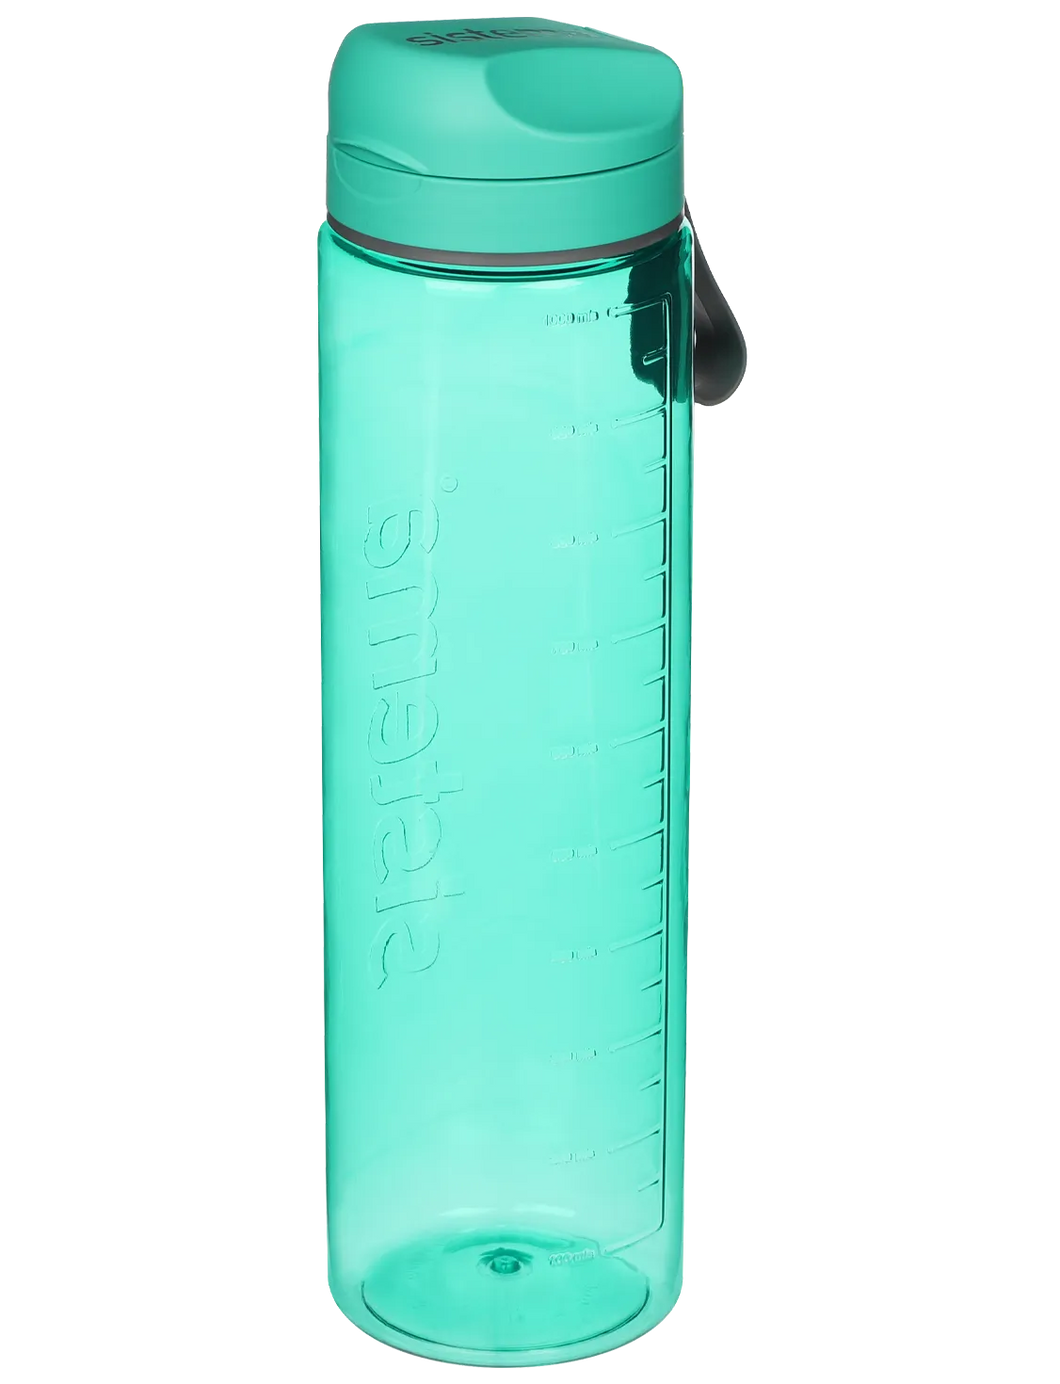 Sistema Tritan Hydratee Bottle, 1 Liter - Available in Several Colors